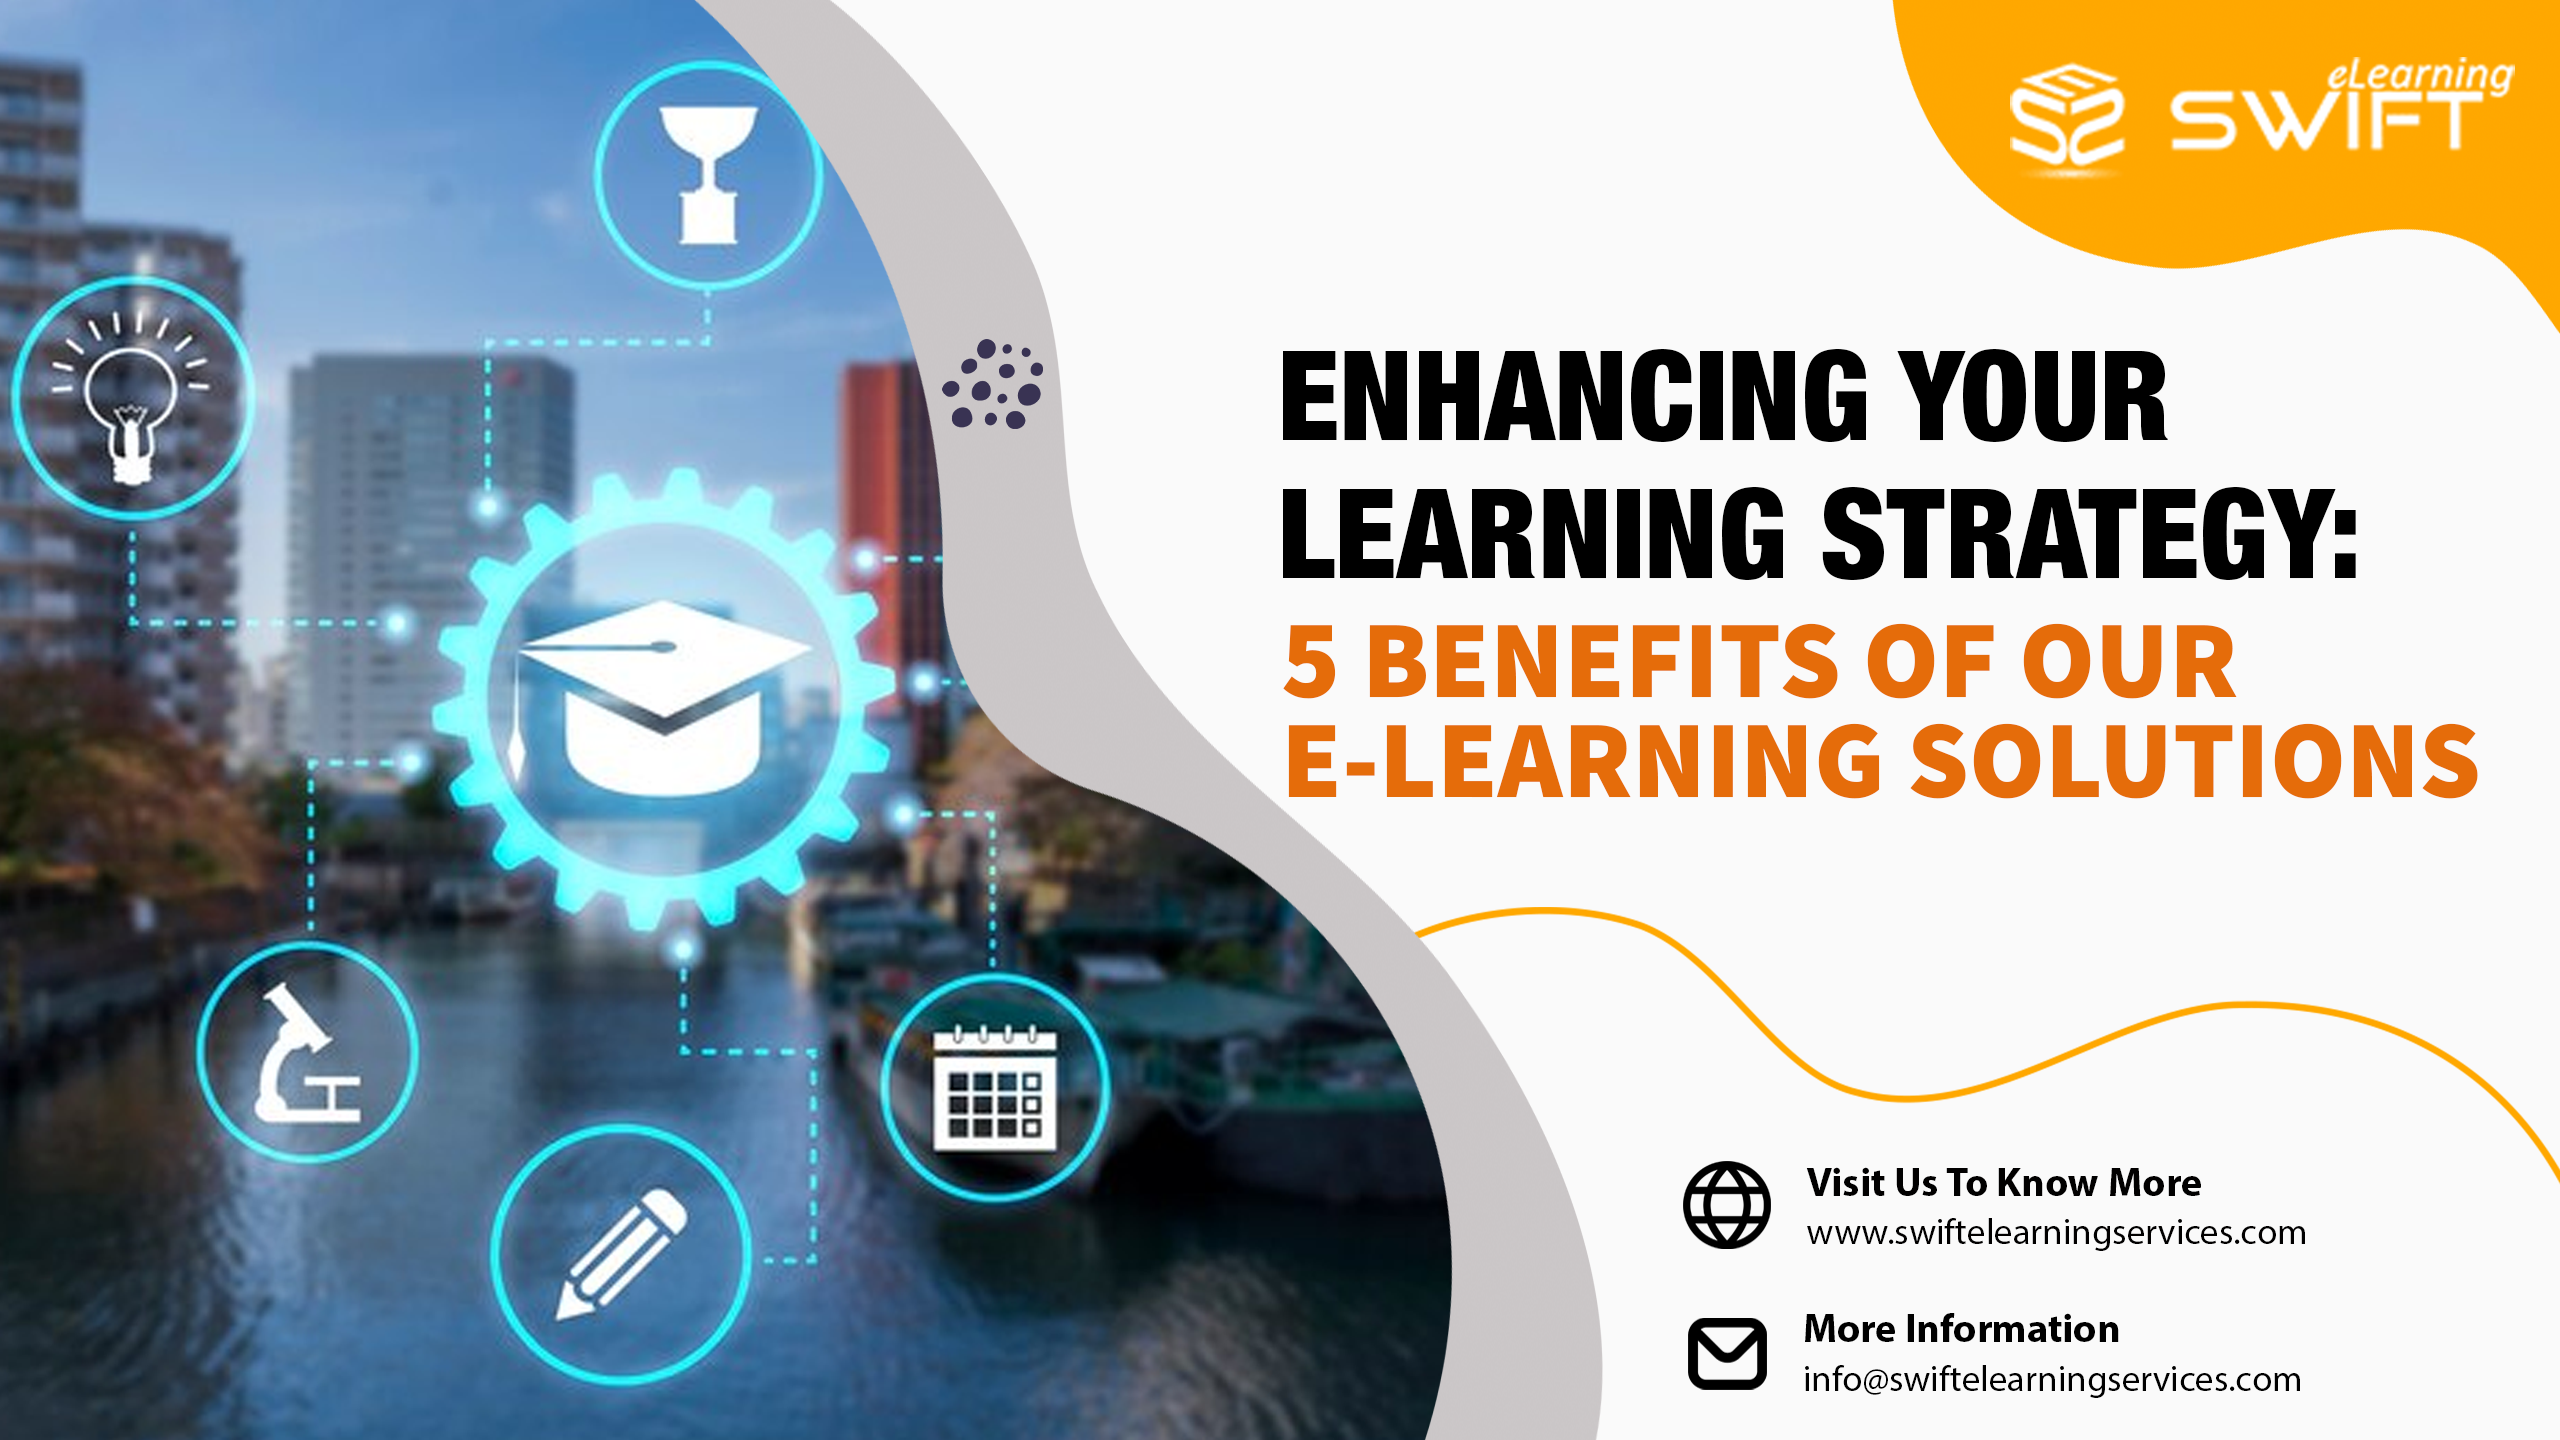 Enhancing Your Learning Strategy 5 Benefits of Our E-Learning Solutions